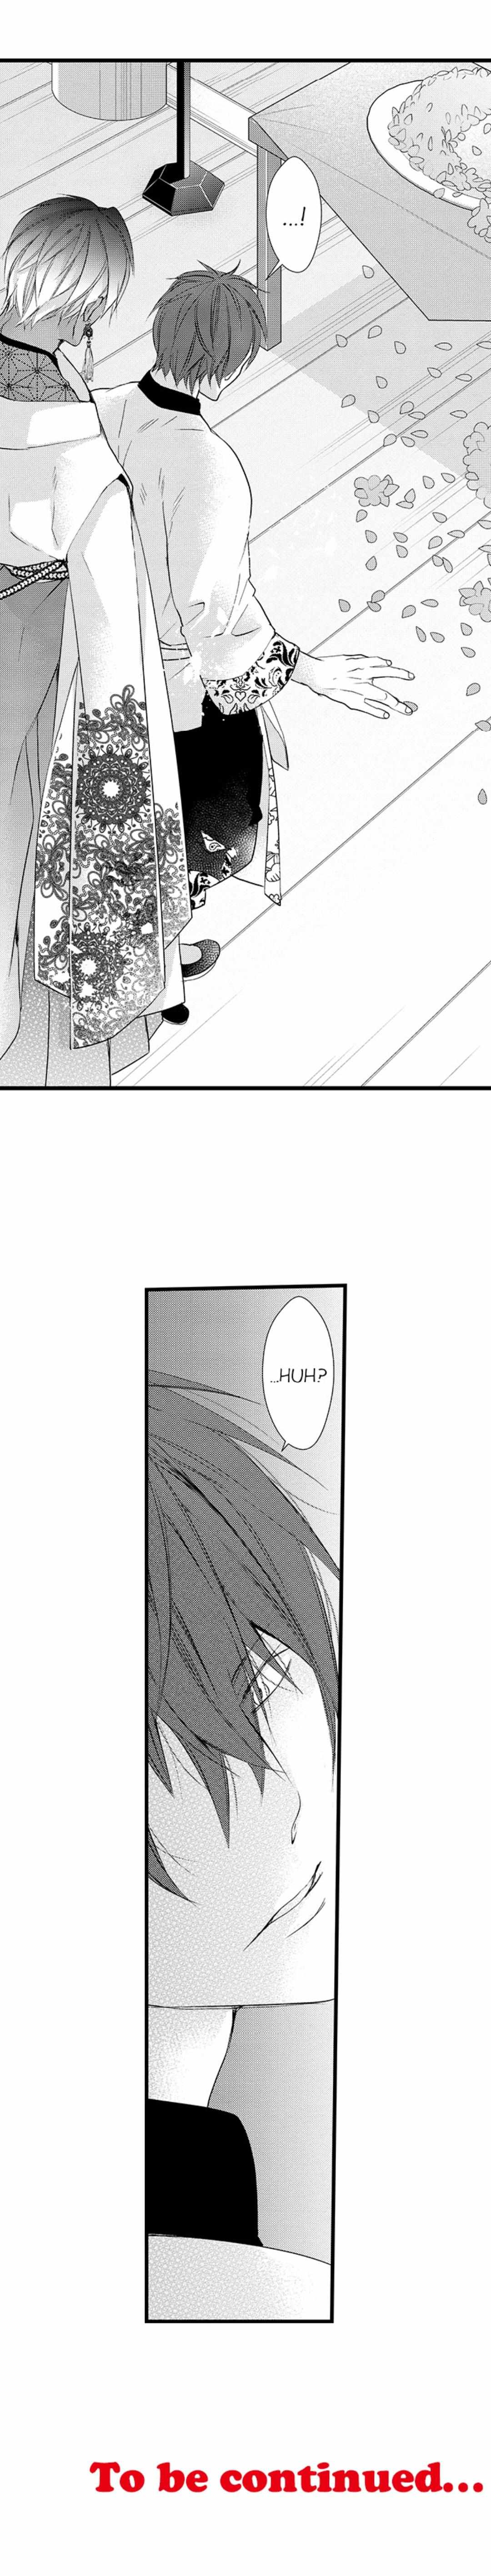 Fanboy Summoning Shafted By An Otherworldly Beast - 115 page 4-0ba1e0e2